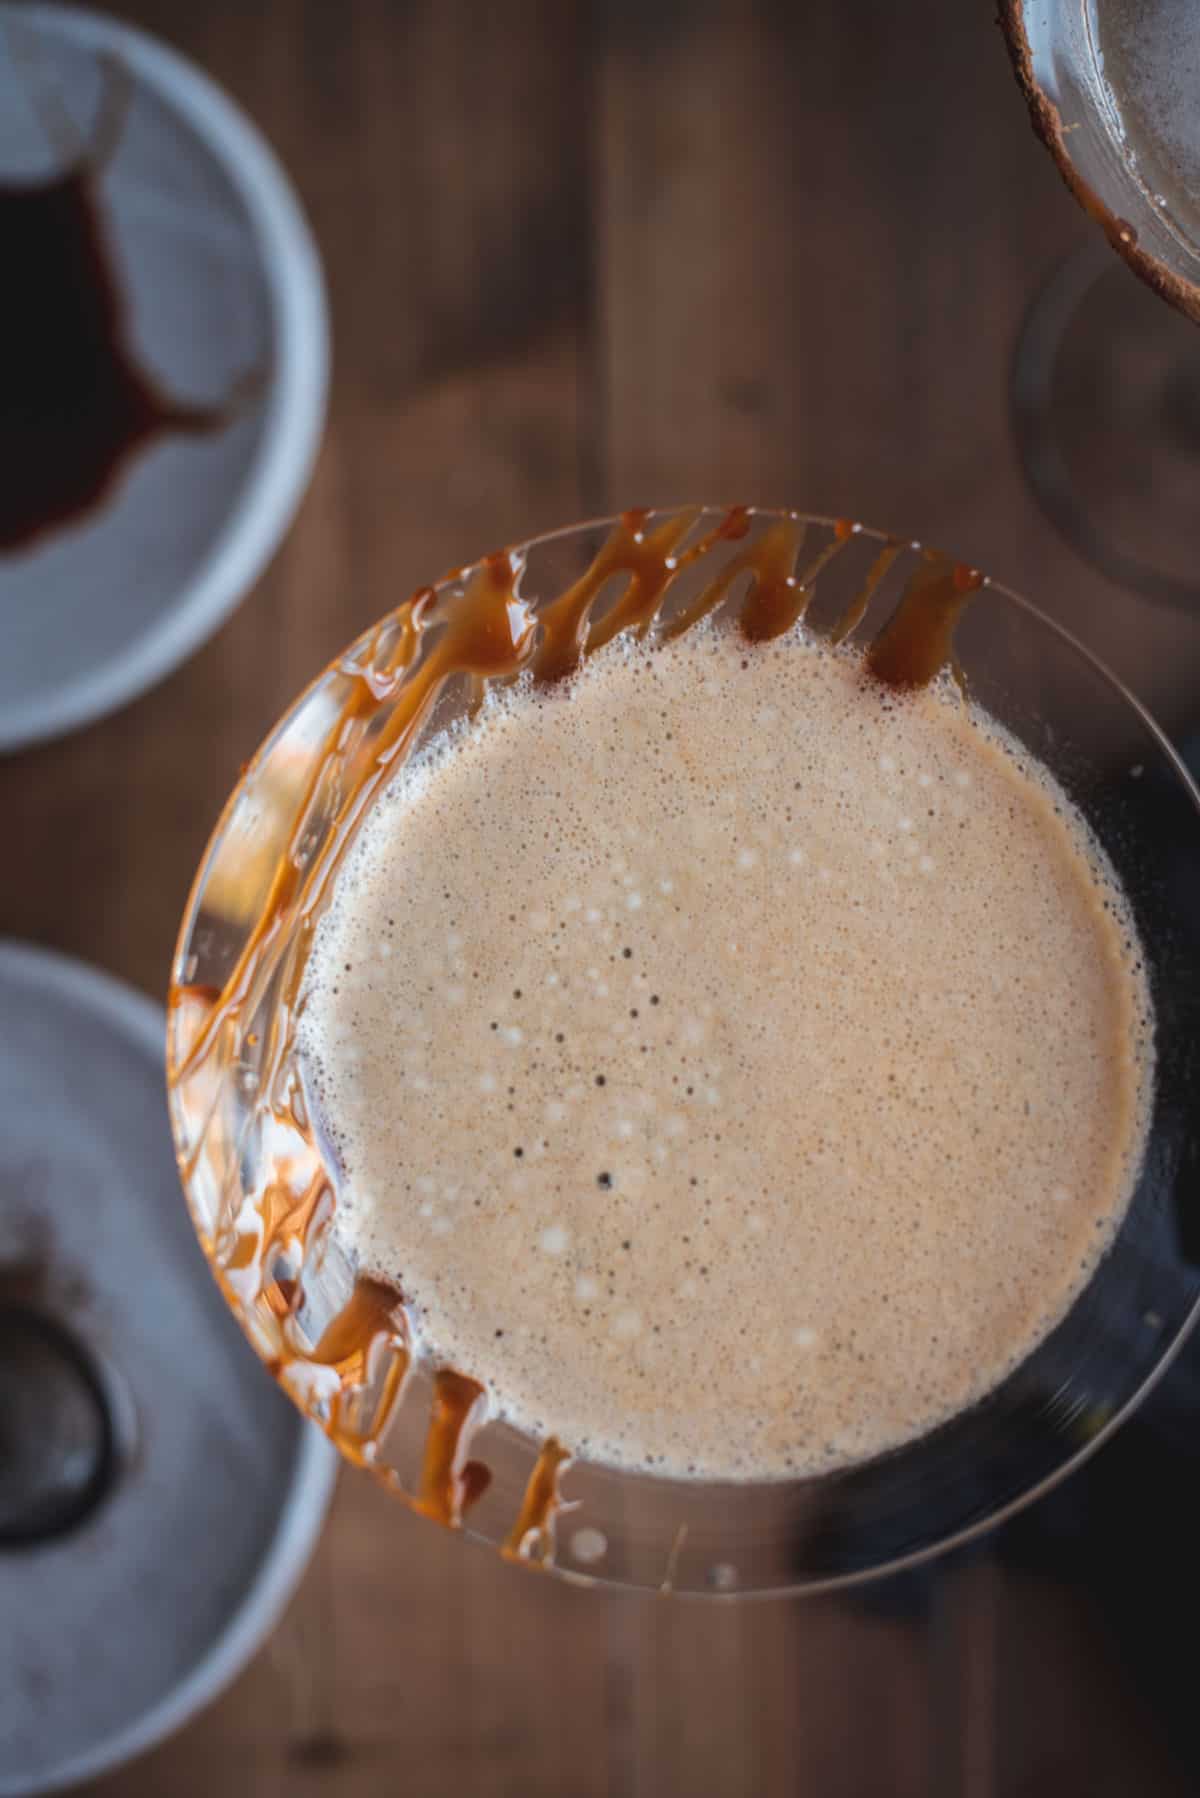 View from above of this Fall cocktail. The top is frothy with a caramel drizzle on the left side of the glass.